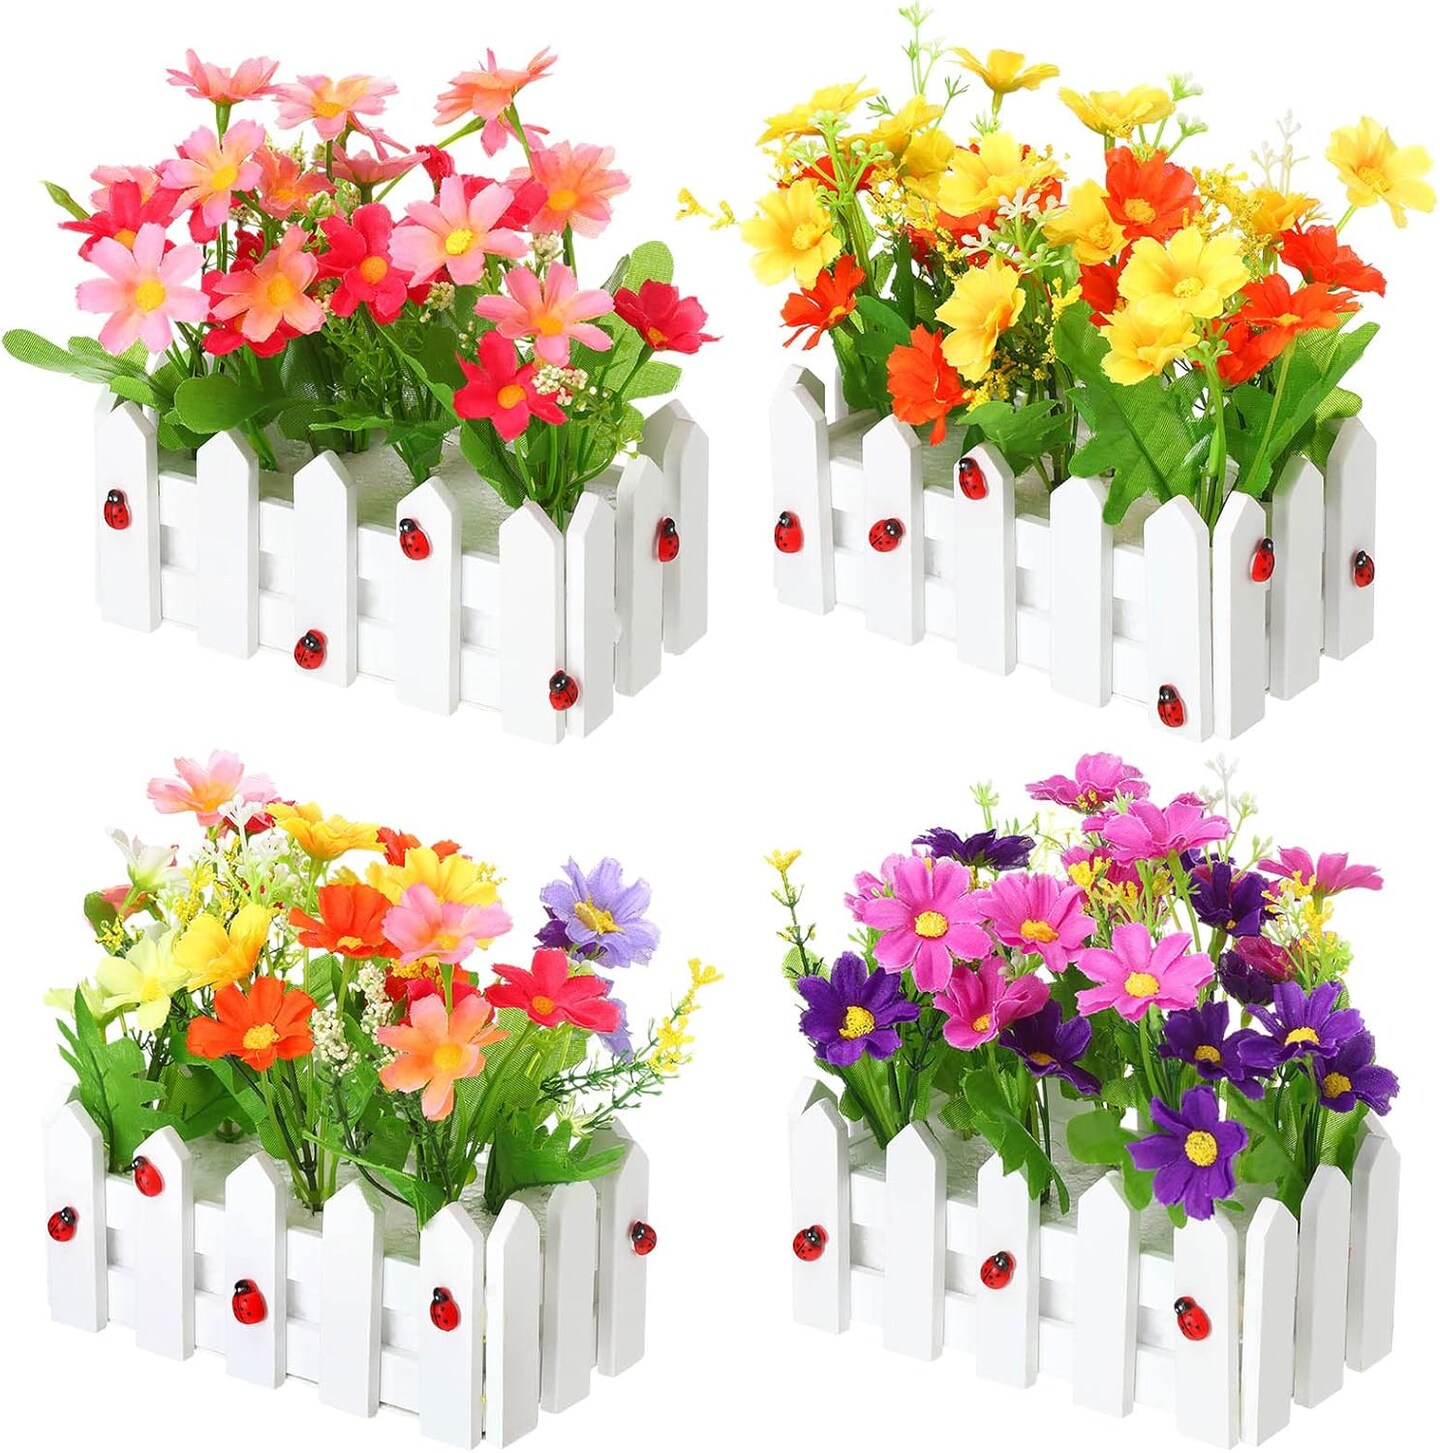 Artificial Flower Plants Potted in Picket Fence Mixed Color Daisies in Picket Fence Pot for Indoor Office Wedding Home Spring Decor (6.3 inches, 24 pieces)